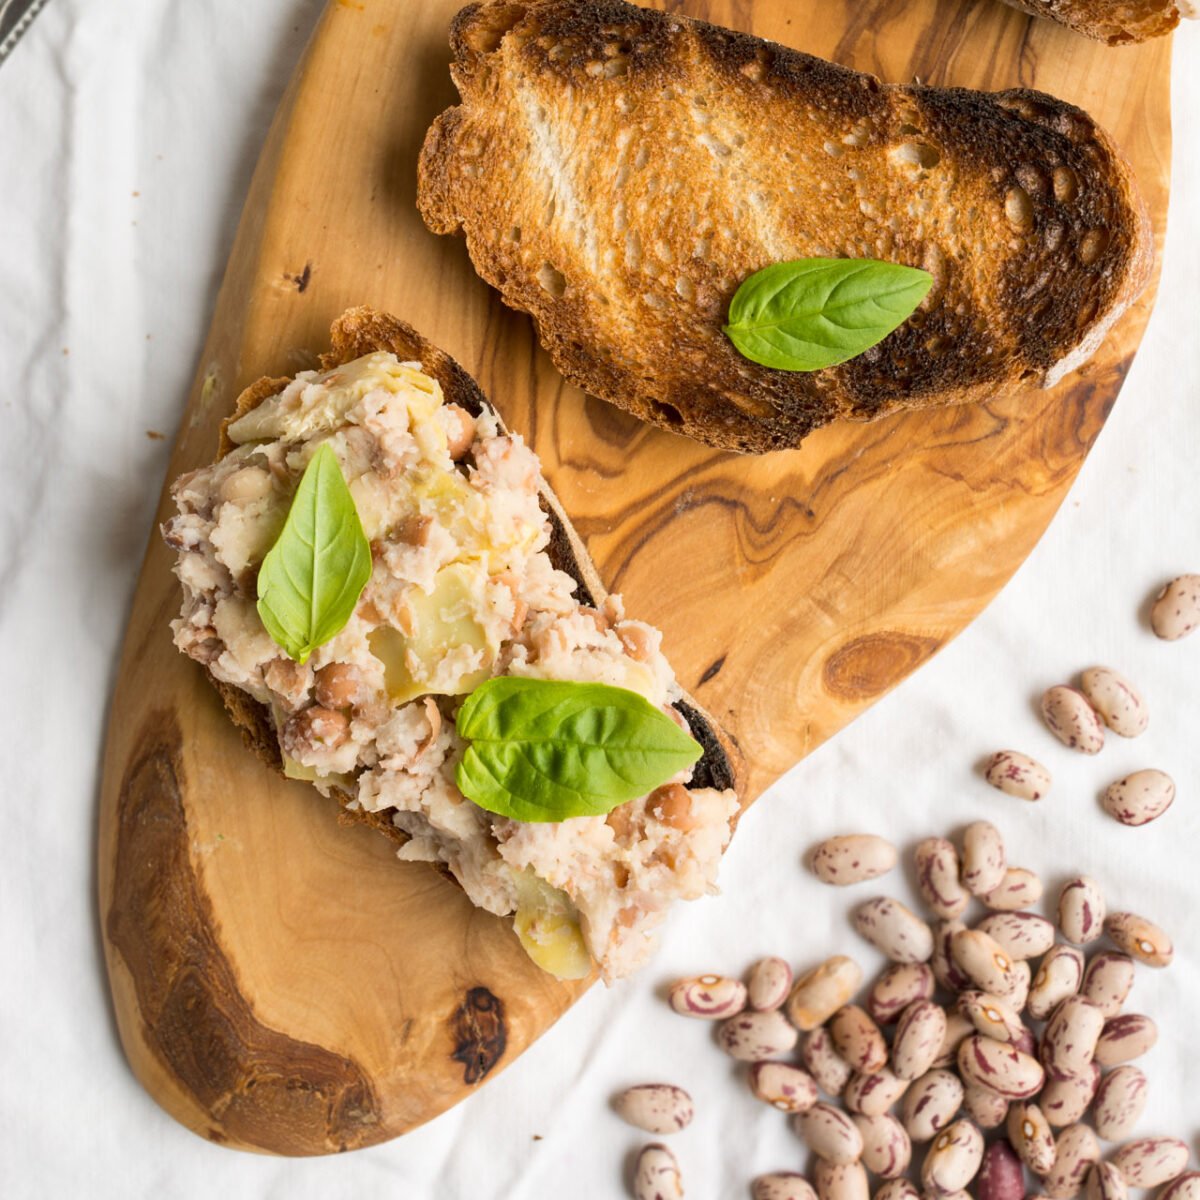 This Super Quick Two Bean and Artichoke Toast is a great lunch or snack when you need something non fussy but delicious. The rich flavour of the beans and the saltiness of the artichoke are perfect for one another topped on a crispy toast!